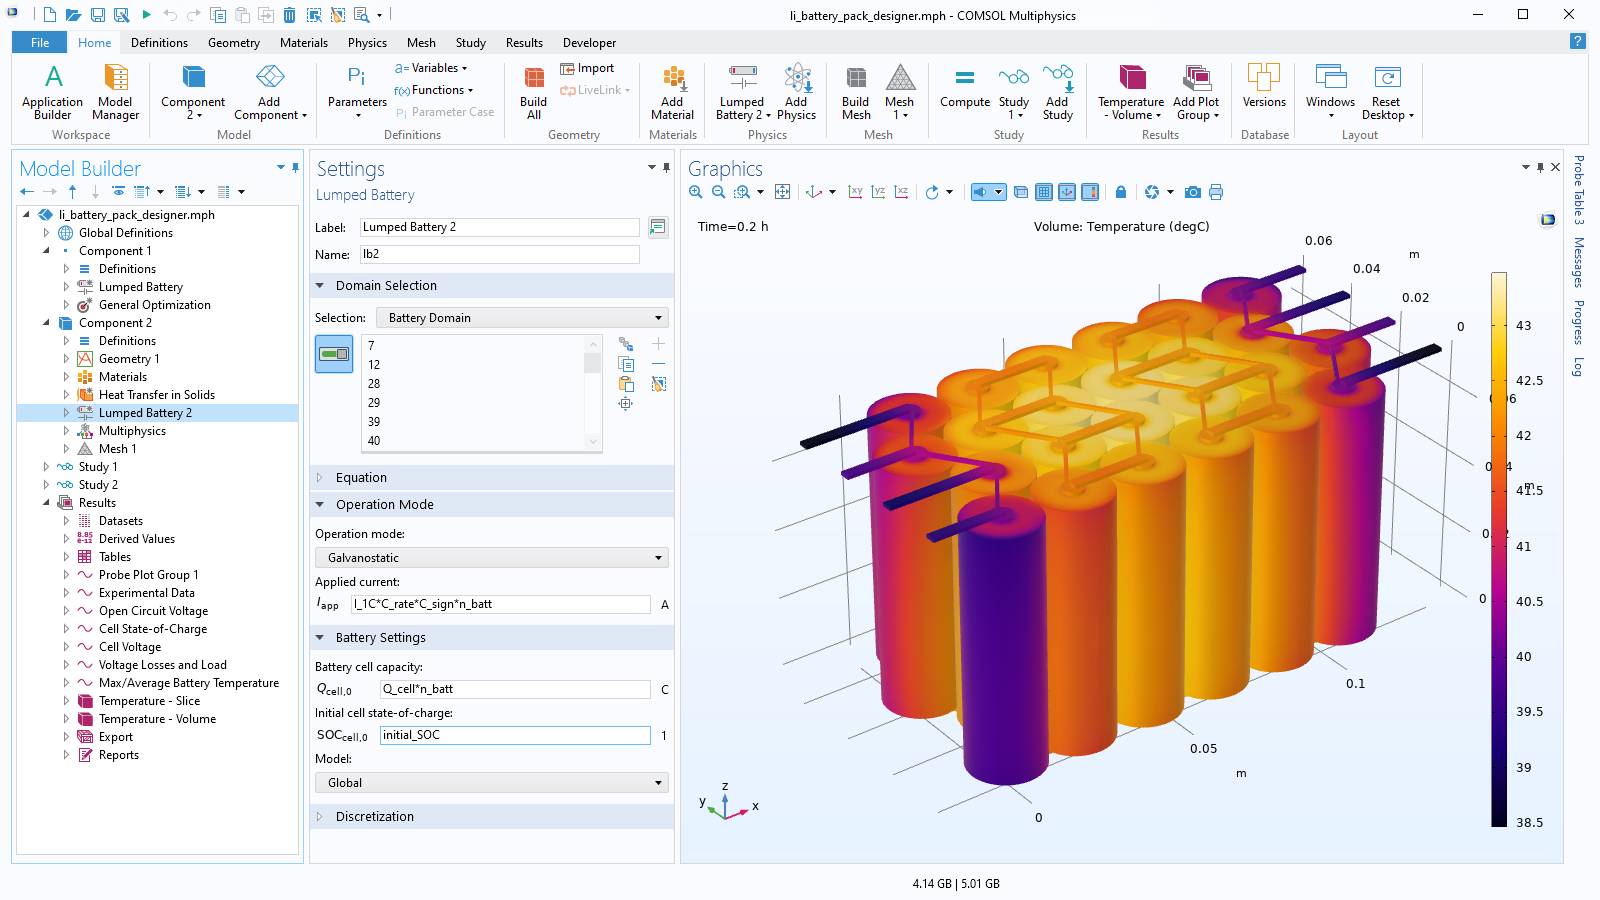 The COMSOL Multiphysics UI showing the Model Builder with the Lumped Battery node highlighted, the corresponding Settings window, and a battery pack model in the Graphics window.